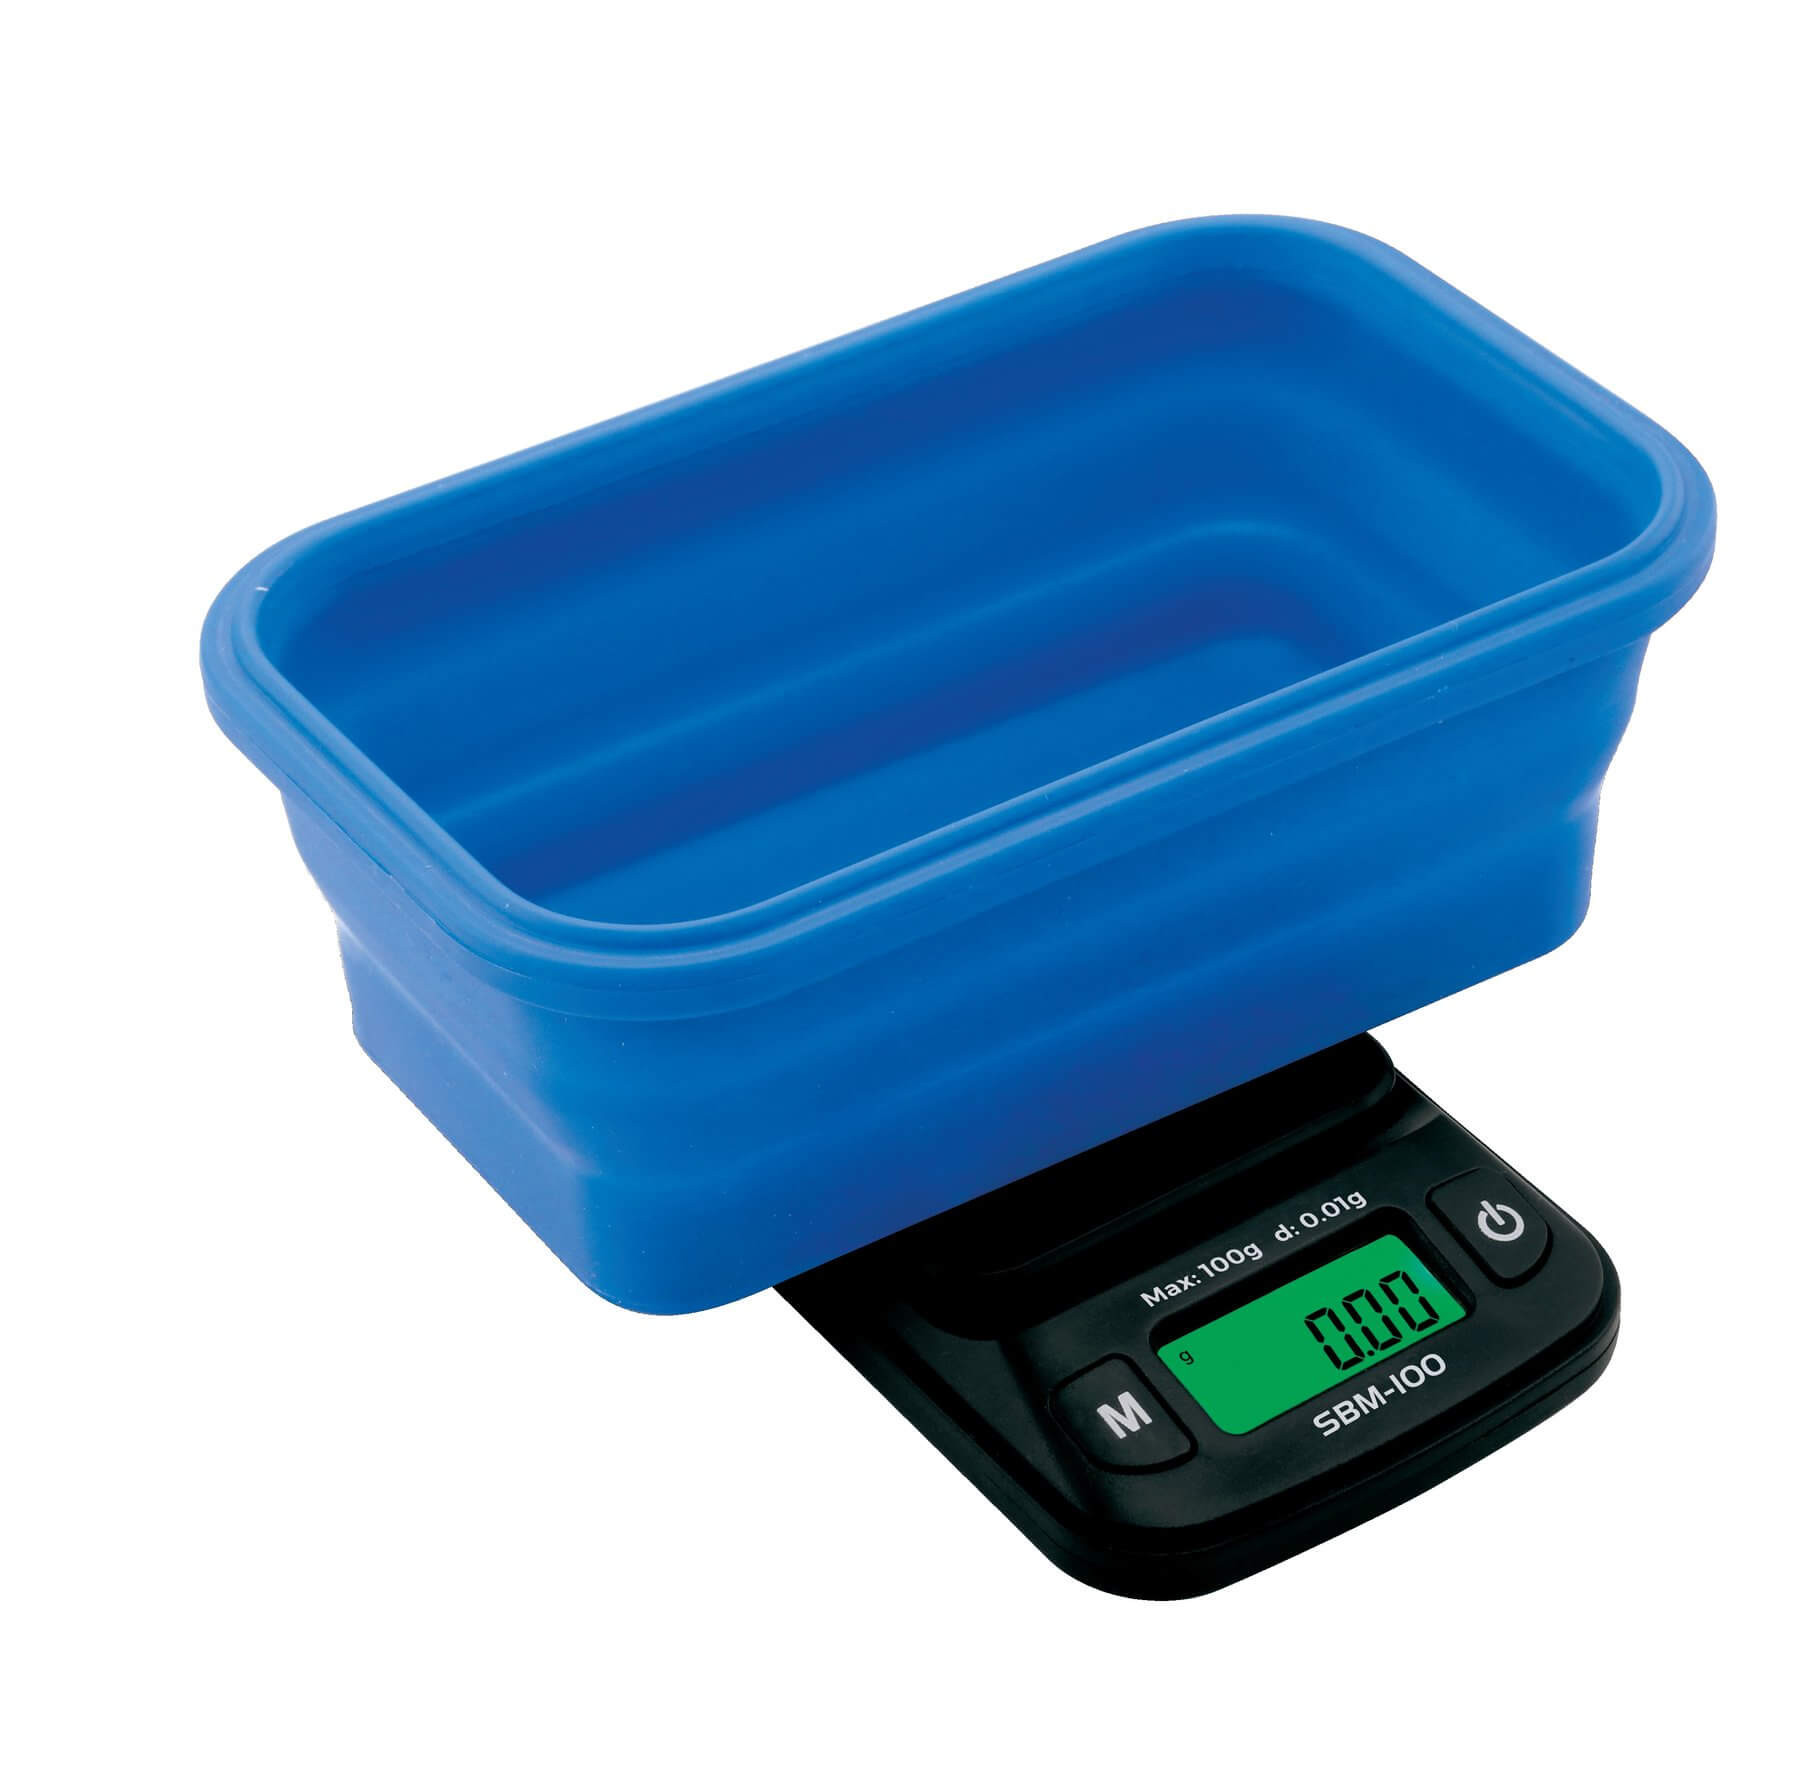 On Balance SBM-100 Scale with Blue Collapsible Silicone Bowl (110g x 0.01g)